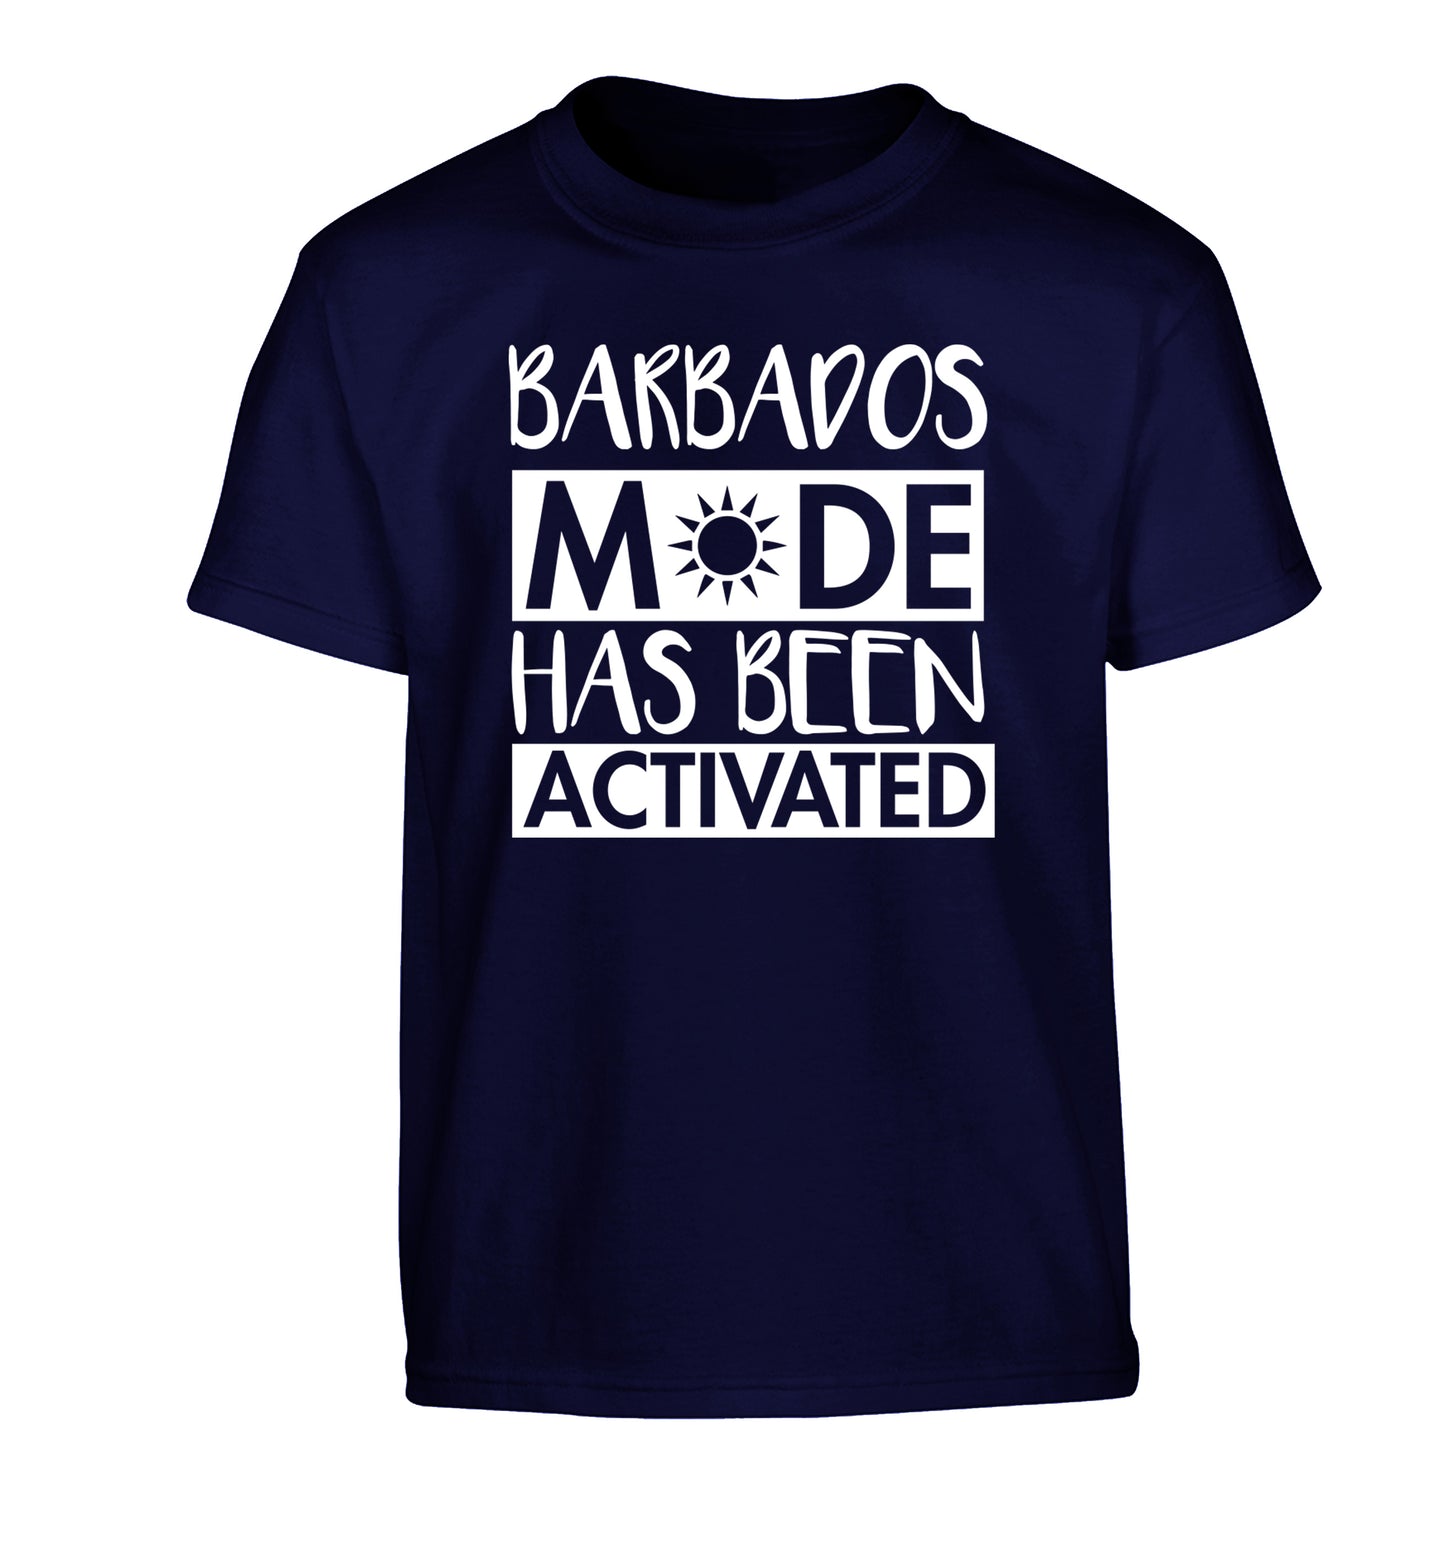 Barbados mode has been activated Children's navy Tshirt 12-13 Years